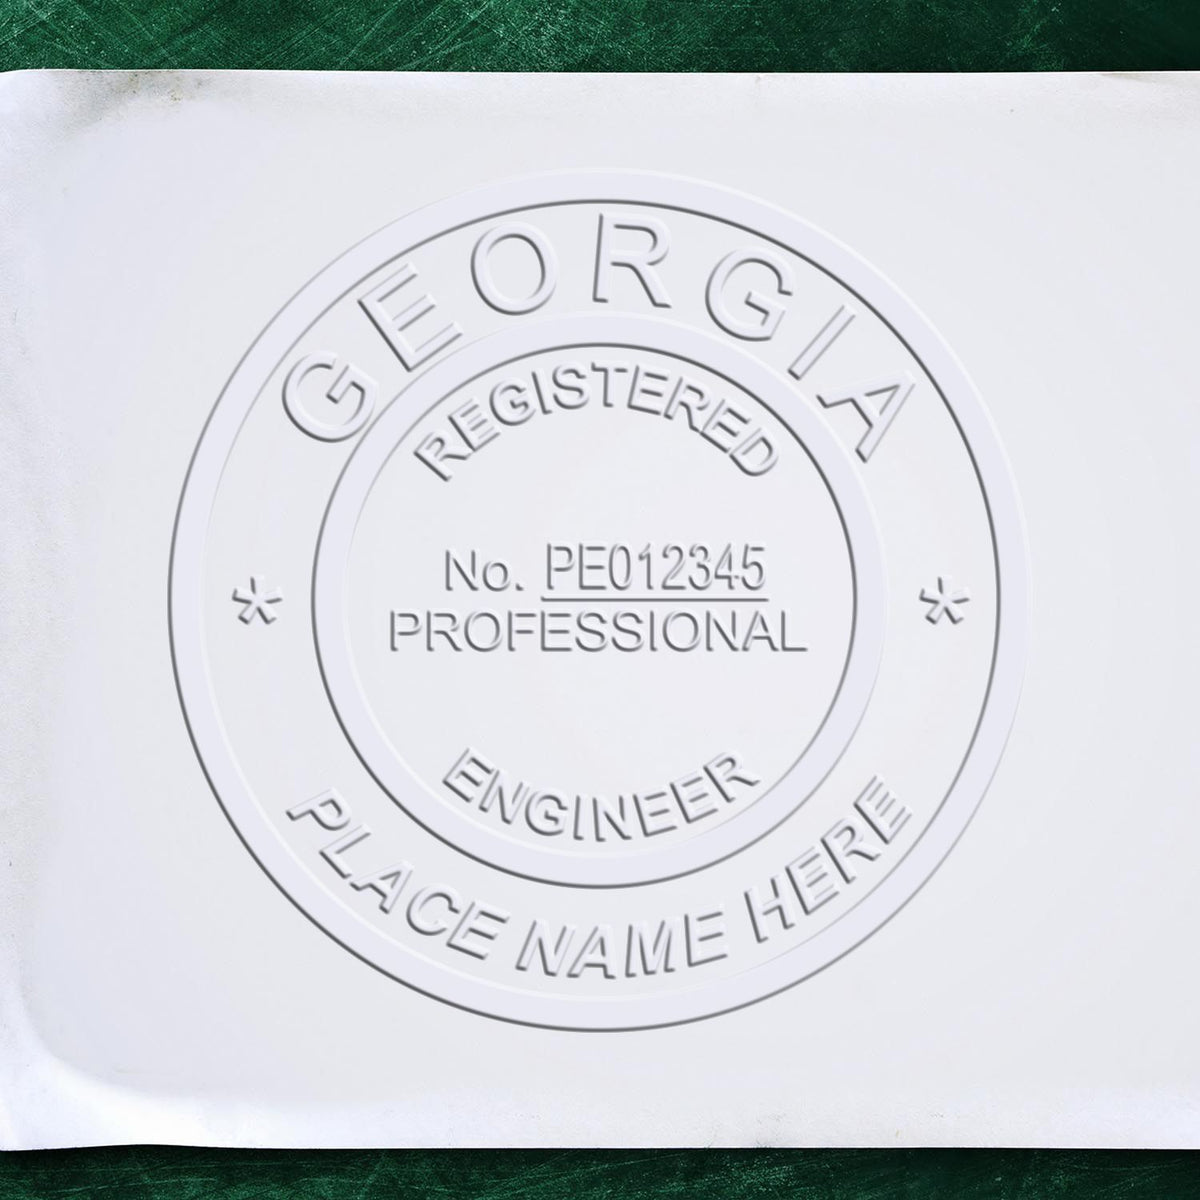 A stamped impression of the Soft Georgia Professional Engineer Seal in this stylish lifestyle photo, setting the tone for a unique and personalized product.